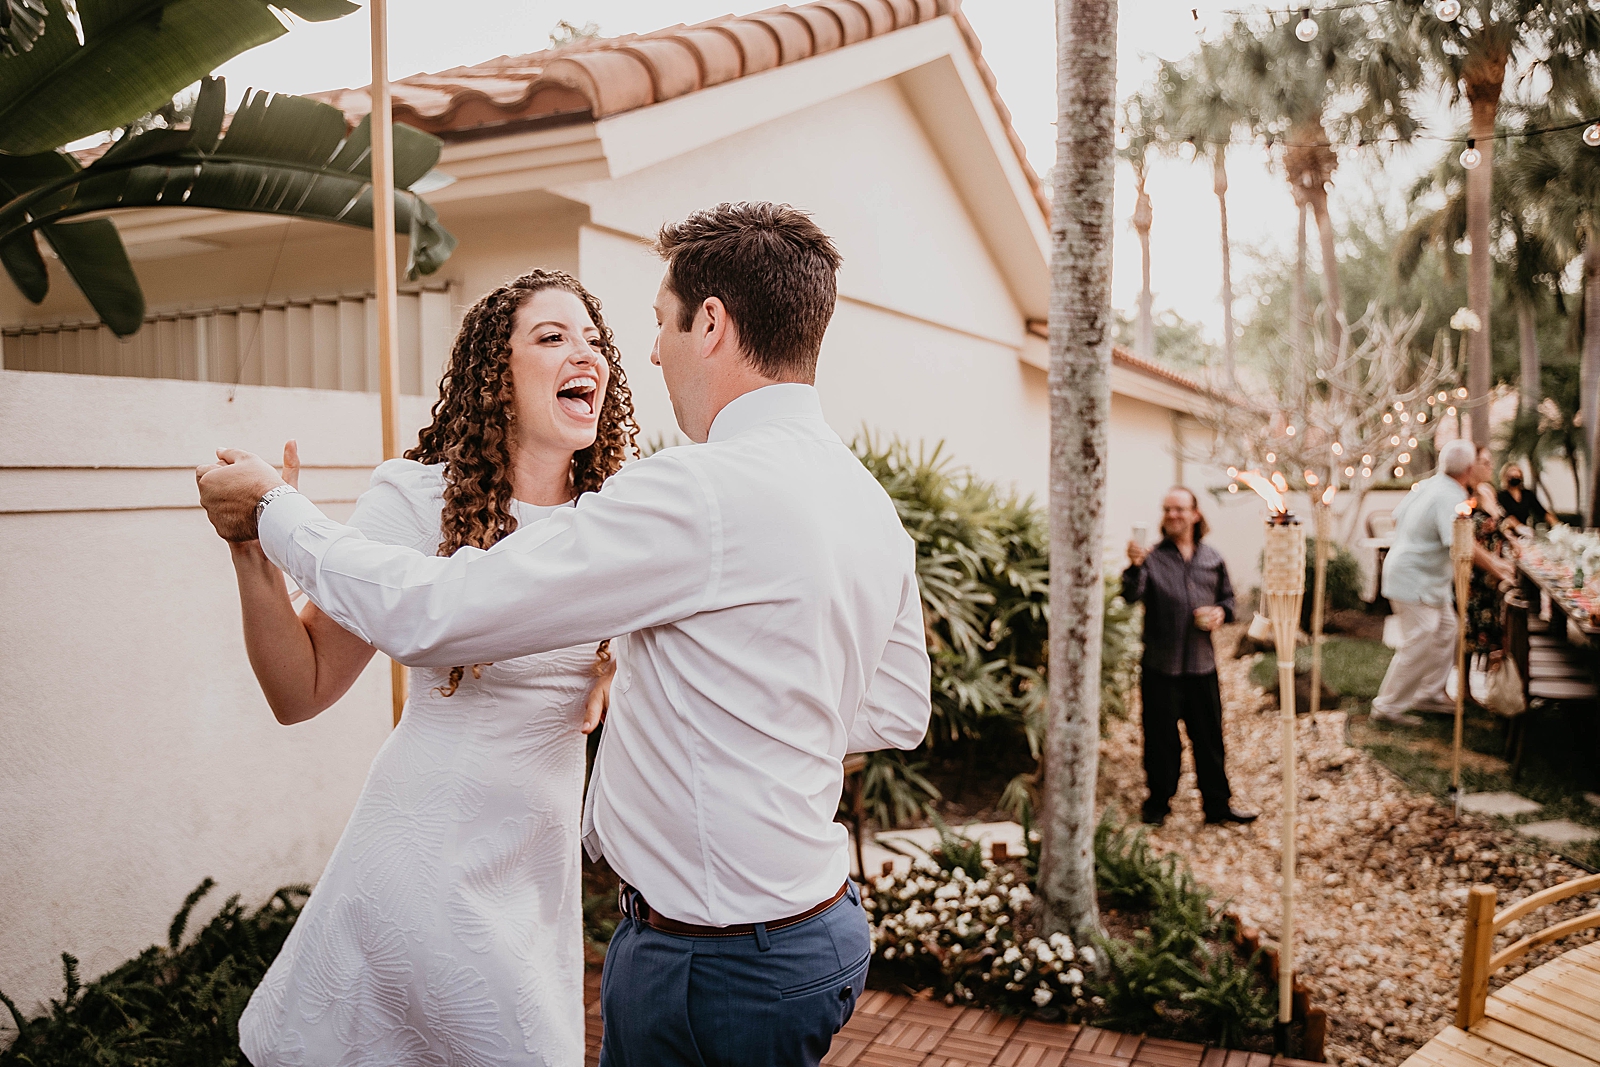 Bride and Groom having fun dancing together First dance Intimate South Florida Wedding Photography captured by South Florida Wedding Photographer Krystal Capone Photography 